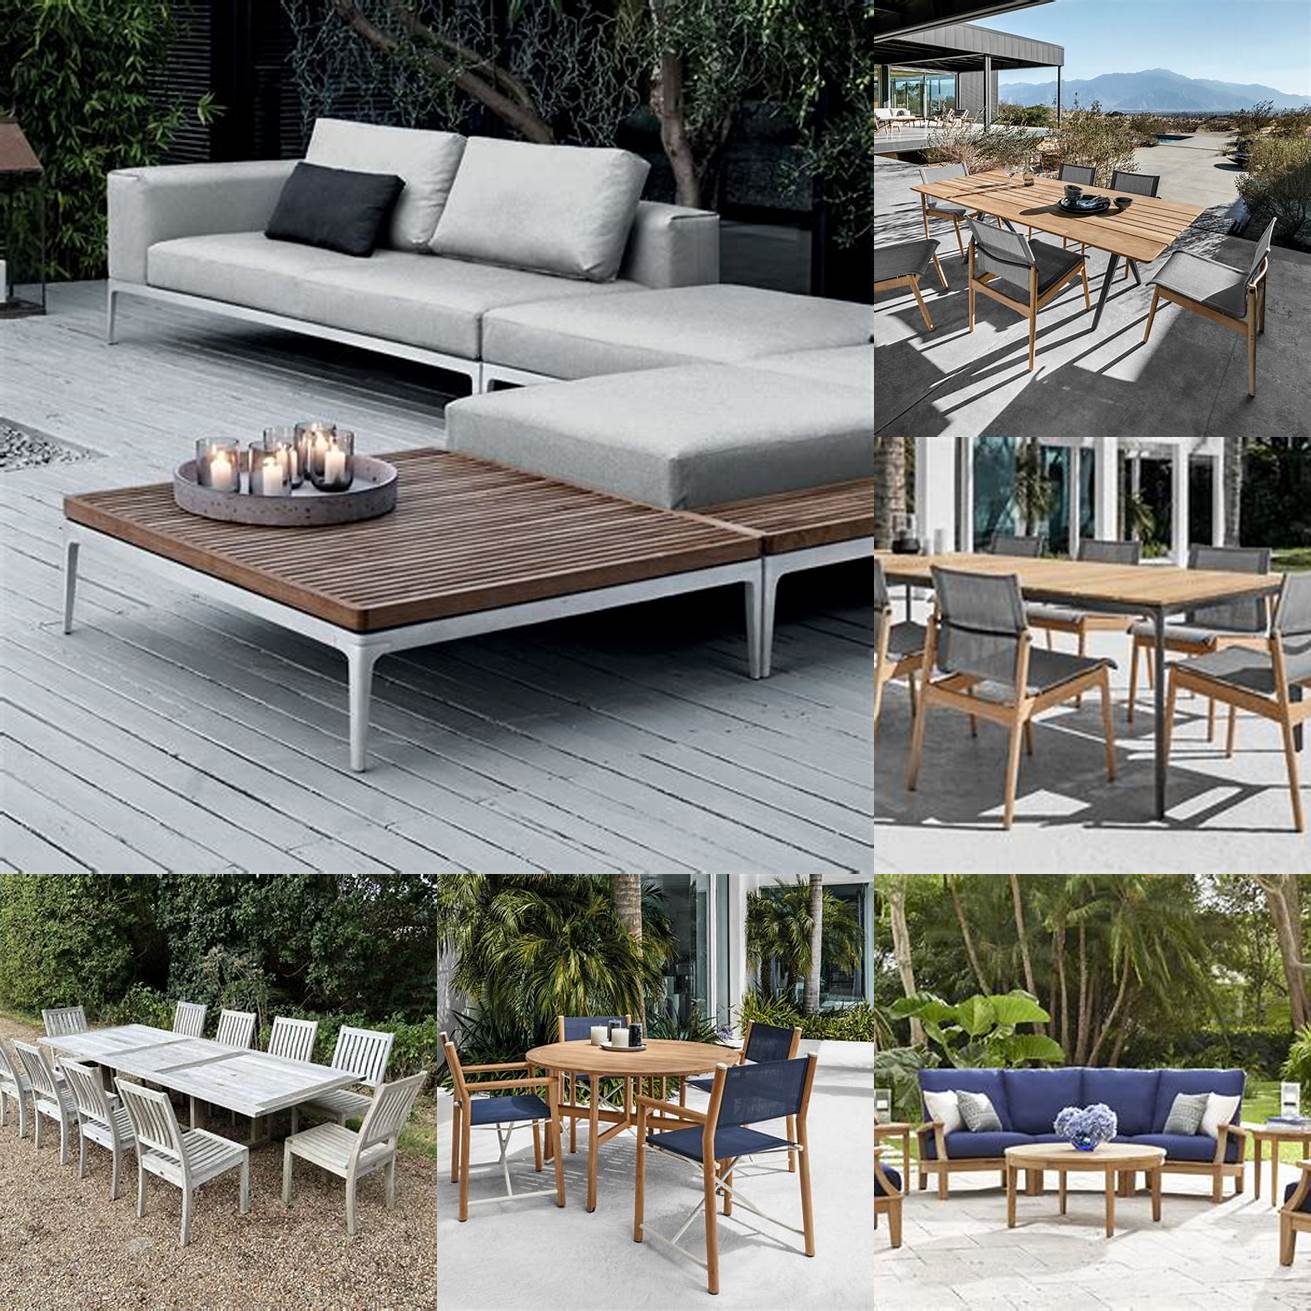 A picture of a Gloster teak furniture set in different settings